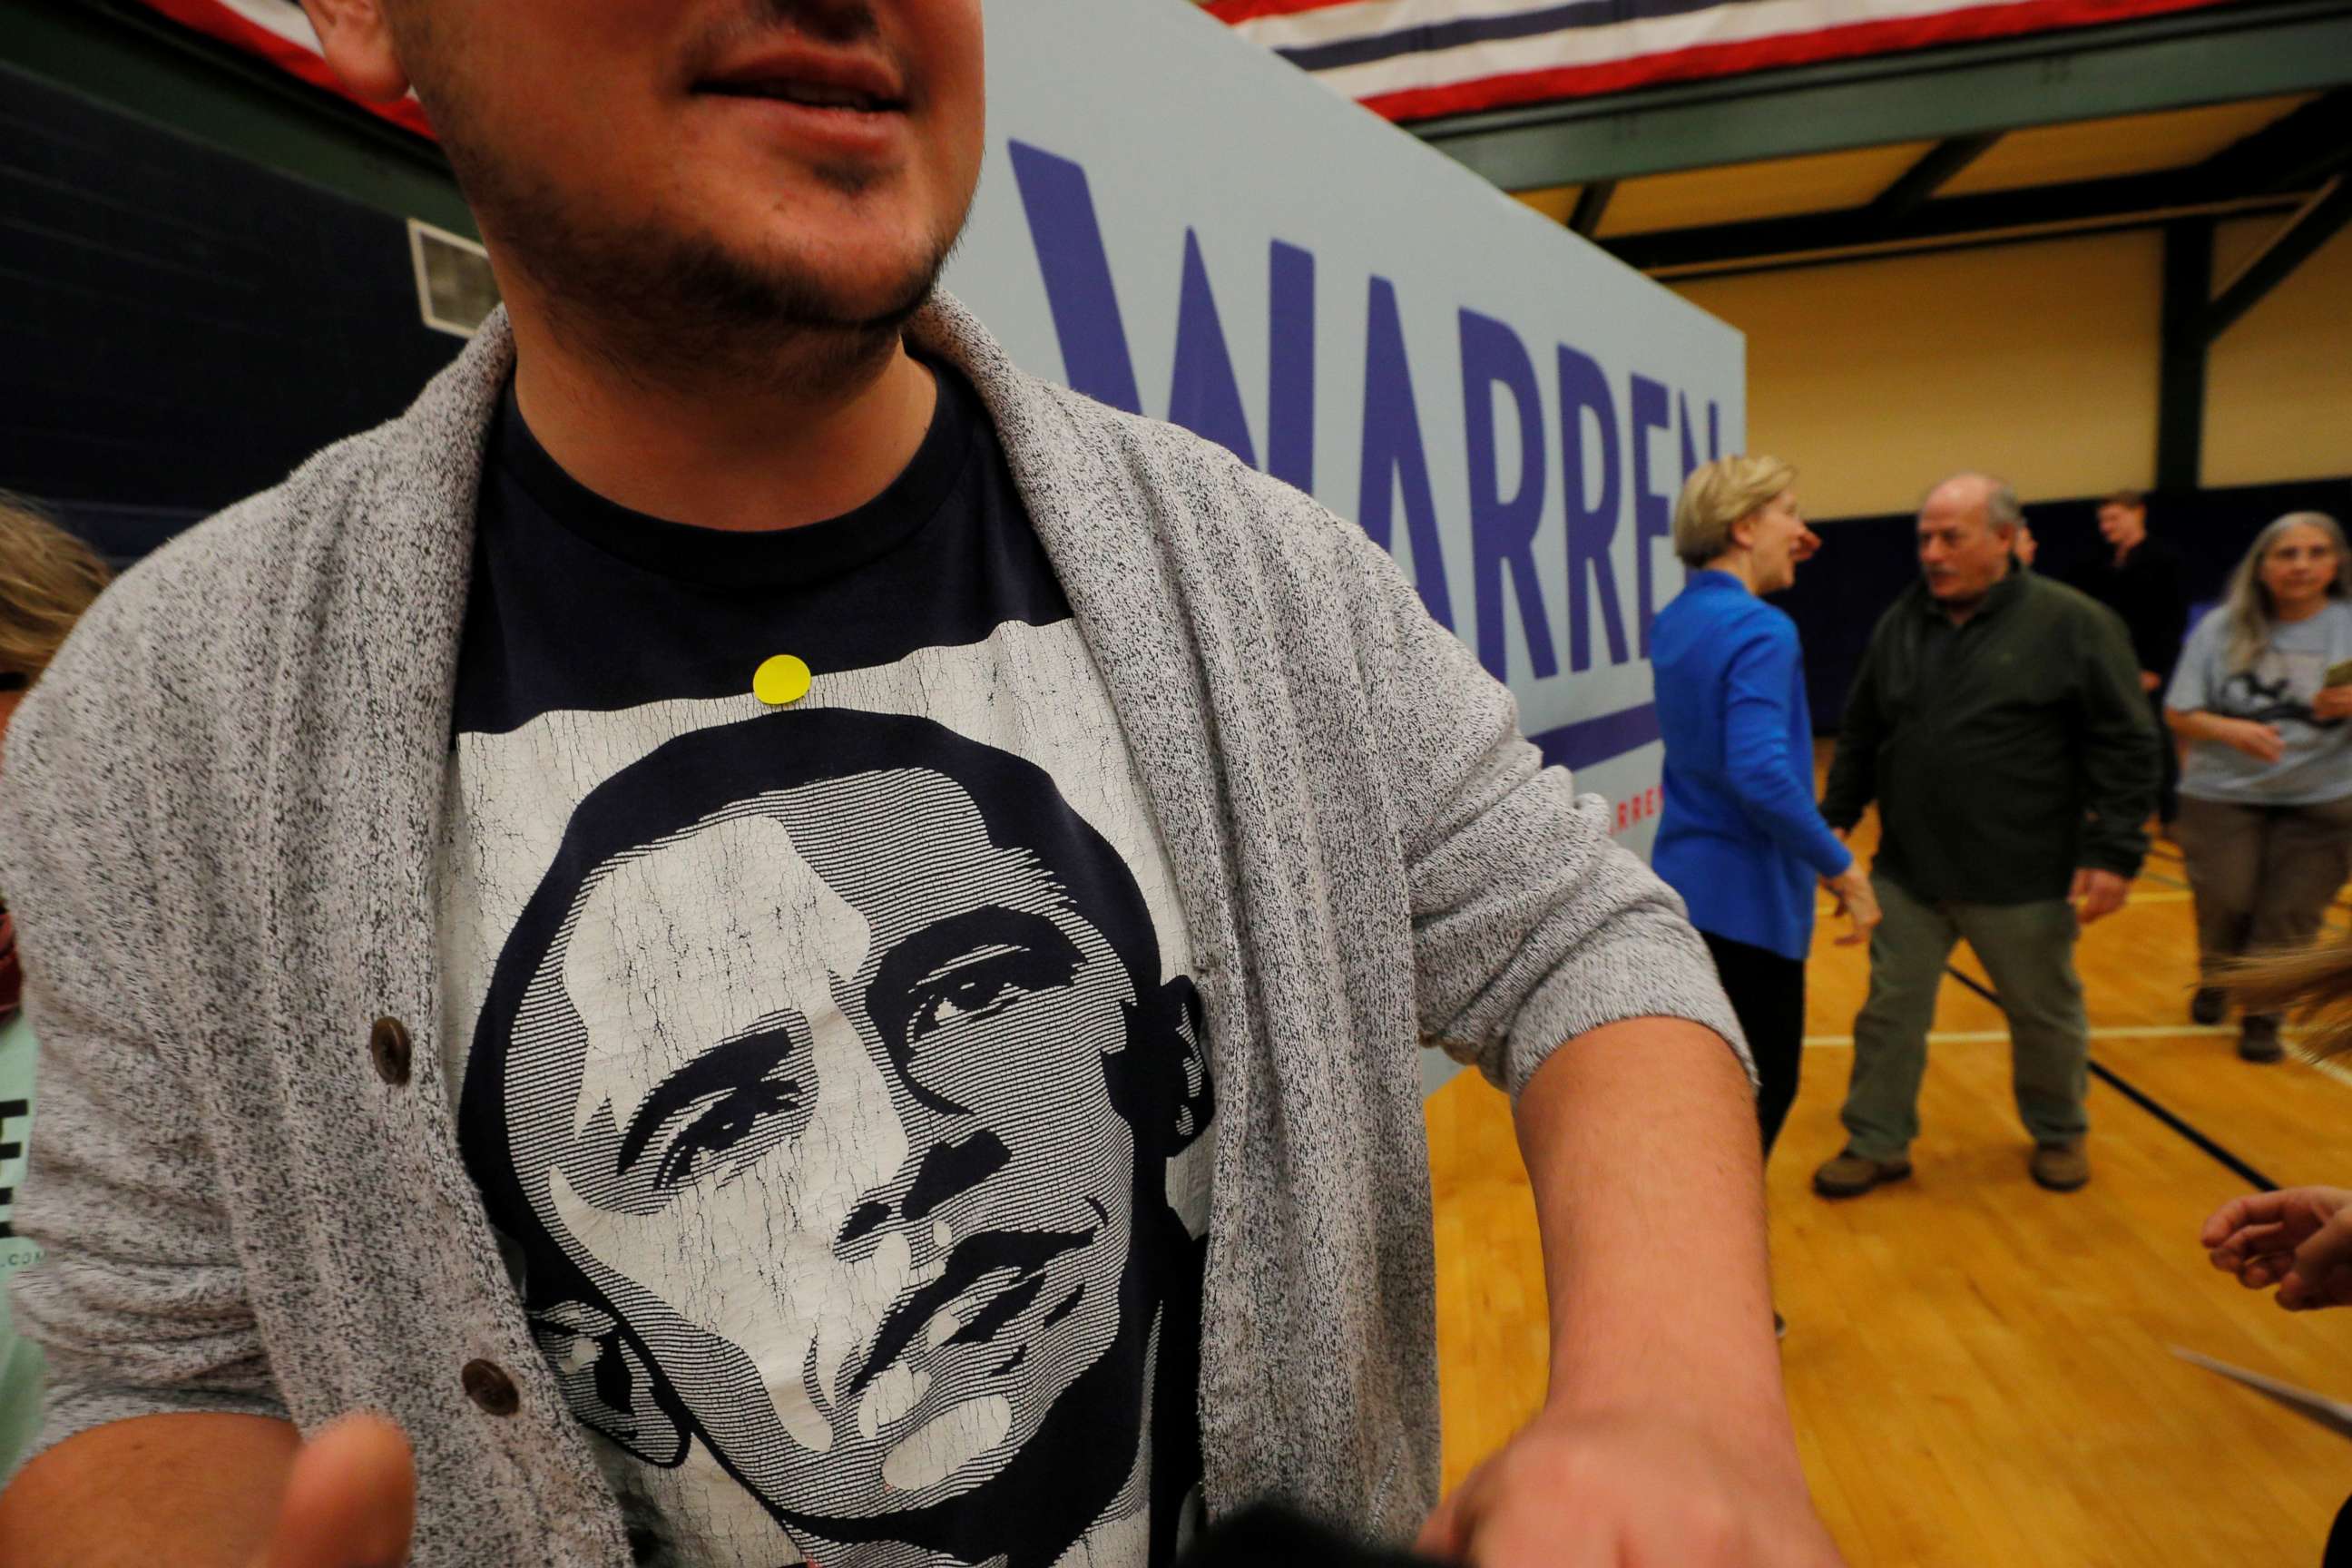 PHOTO: A voter wearing a T-shirt of former President Barack Obama walks away after posing for a photograph with Democratic 2020 presidential candidate and Sen. Elizabeth Warren, D-Mass., at a campaign event in Nashua, N.H., Feb. 5, 2020. 